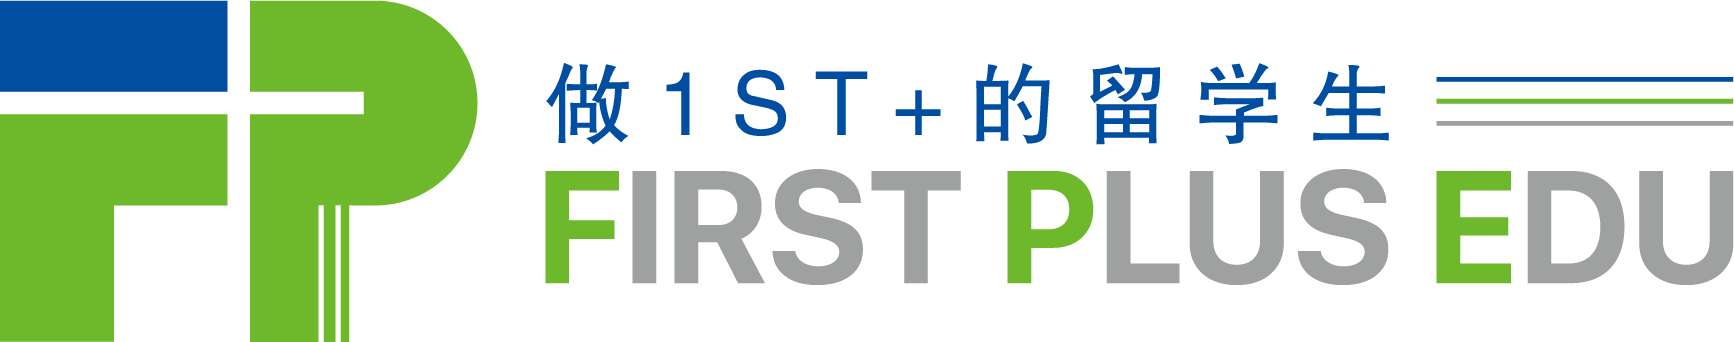 First Plus Education Technology Company logo